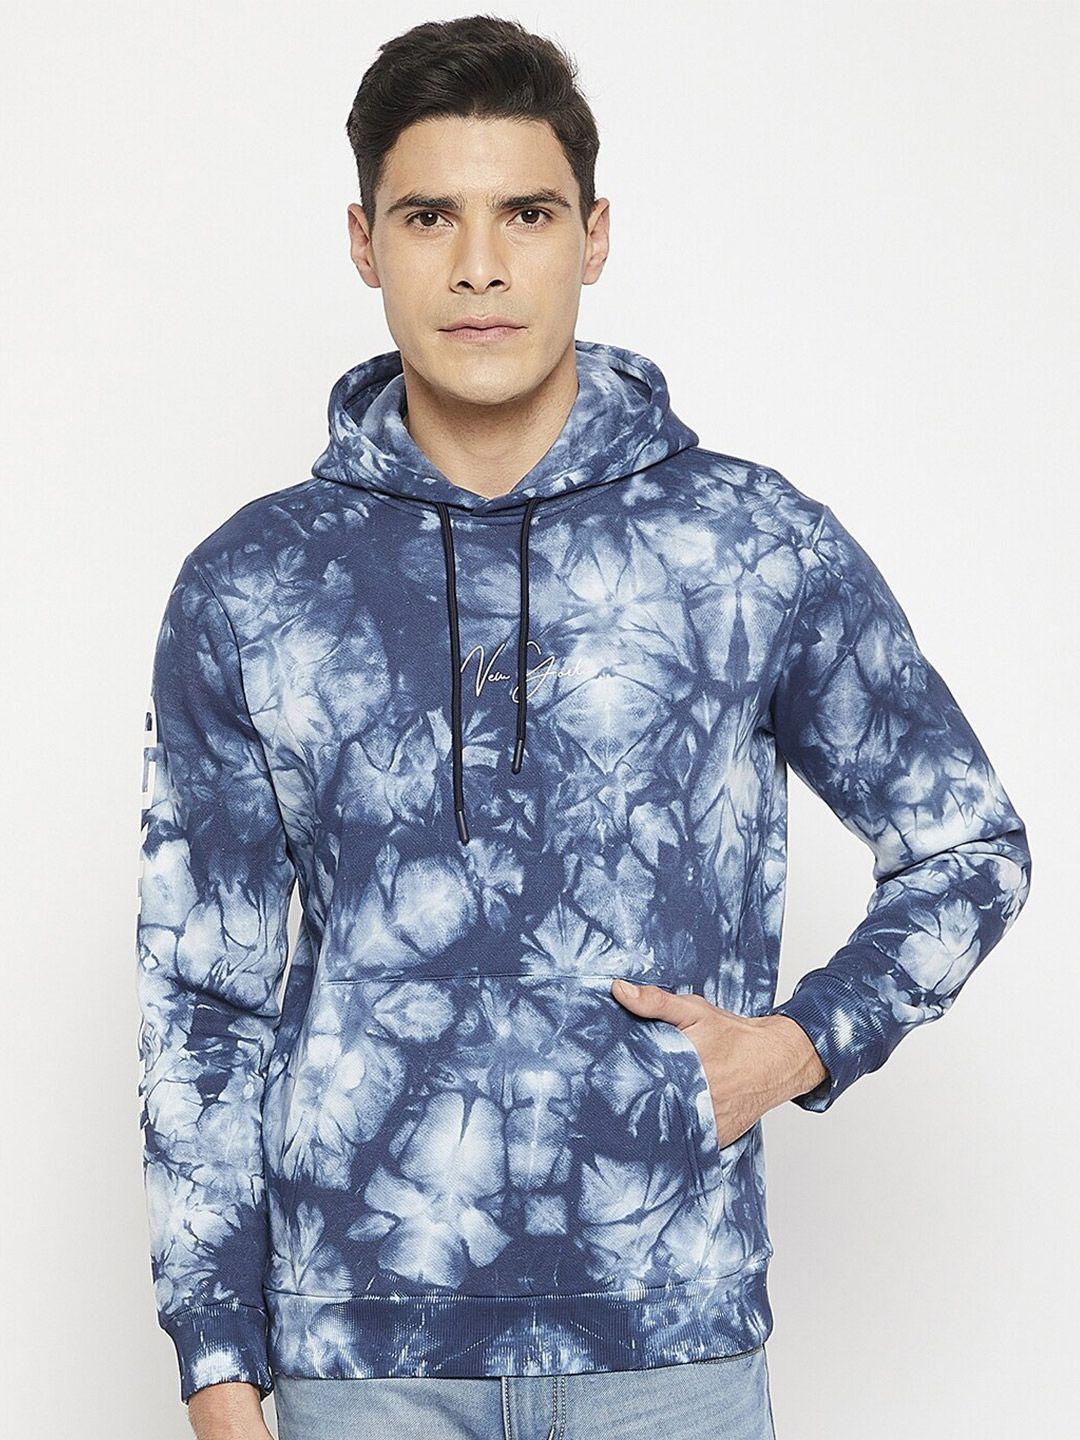 qubic men abstract printed hooded pullover sweatshirt